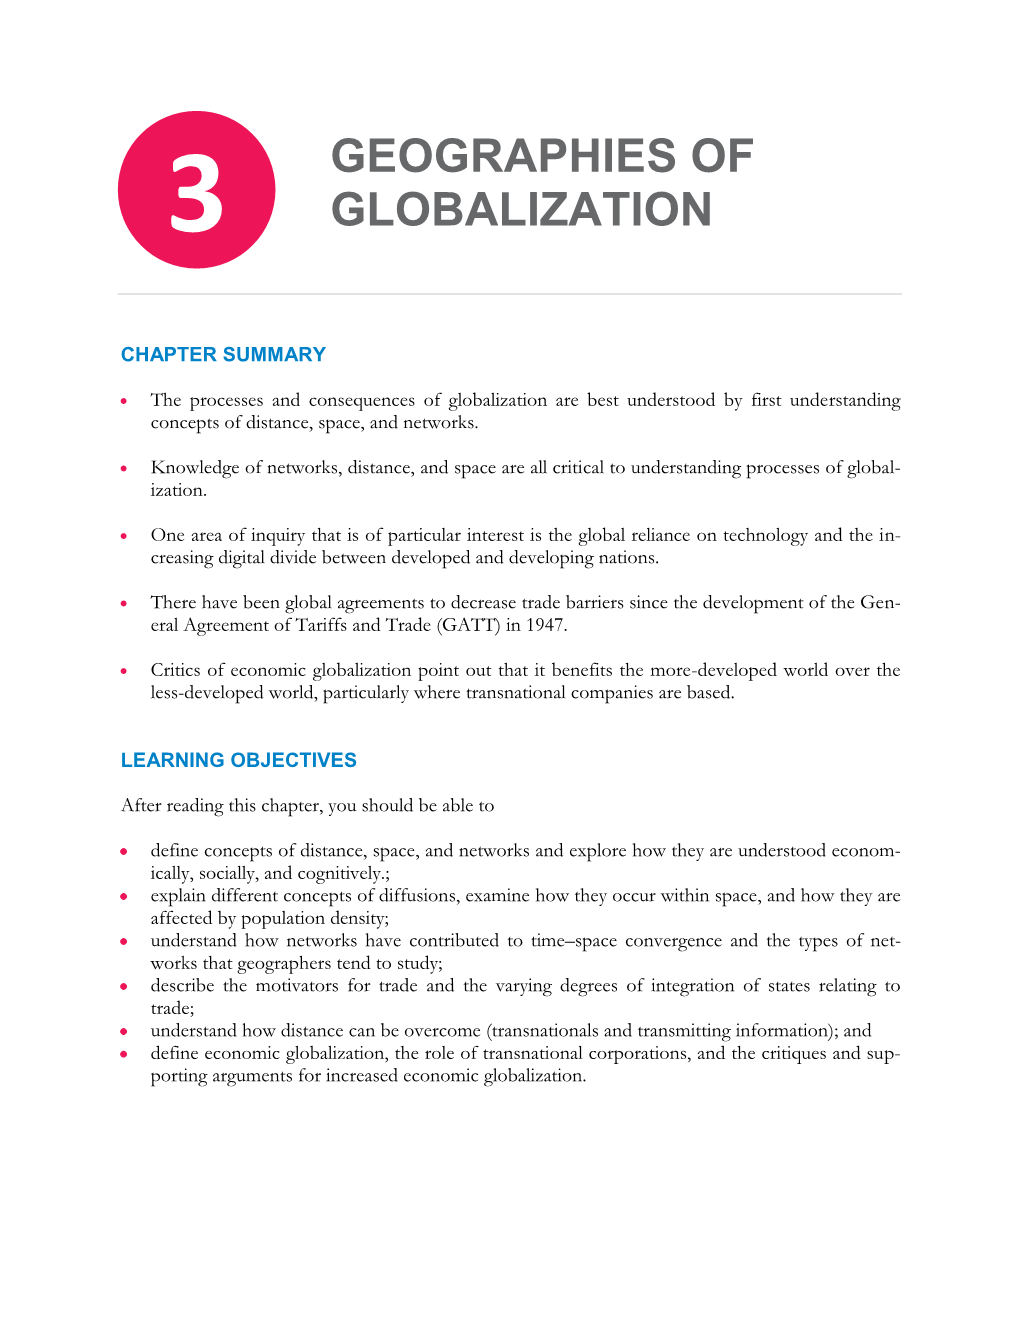 3 Geographies of Globalization